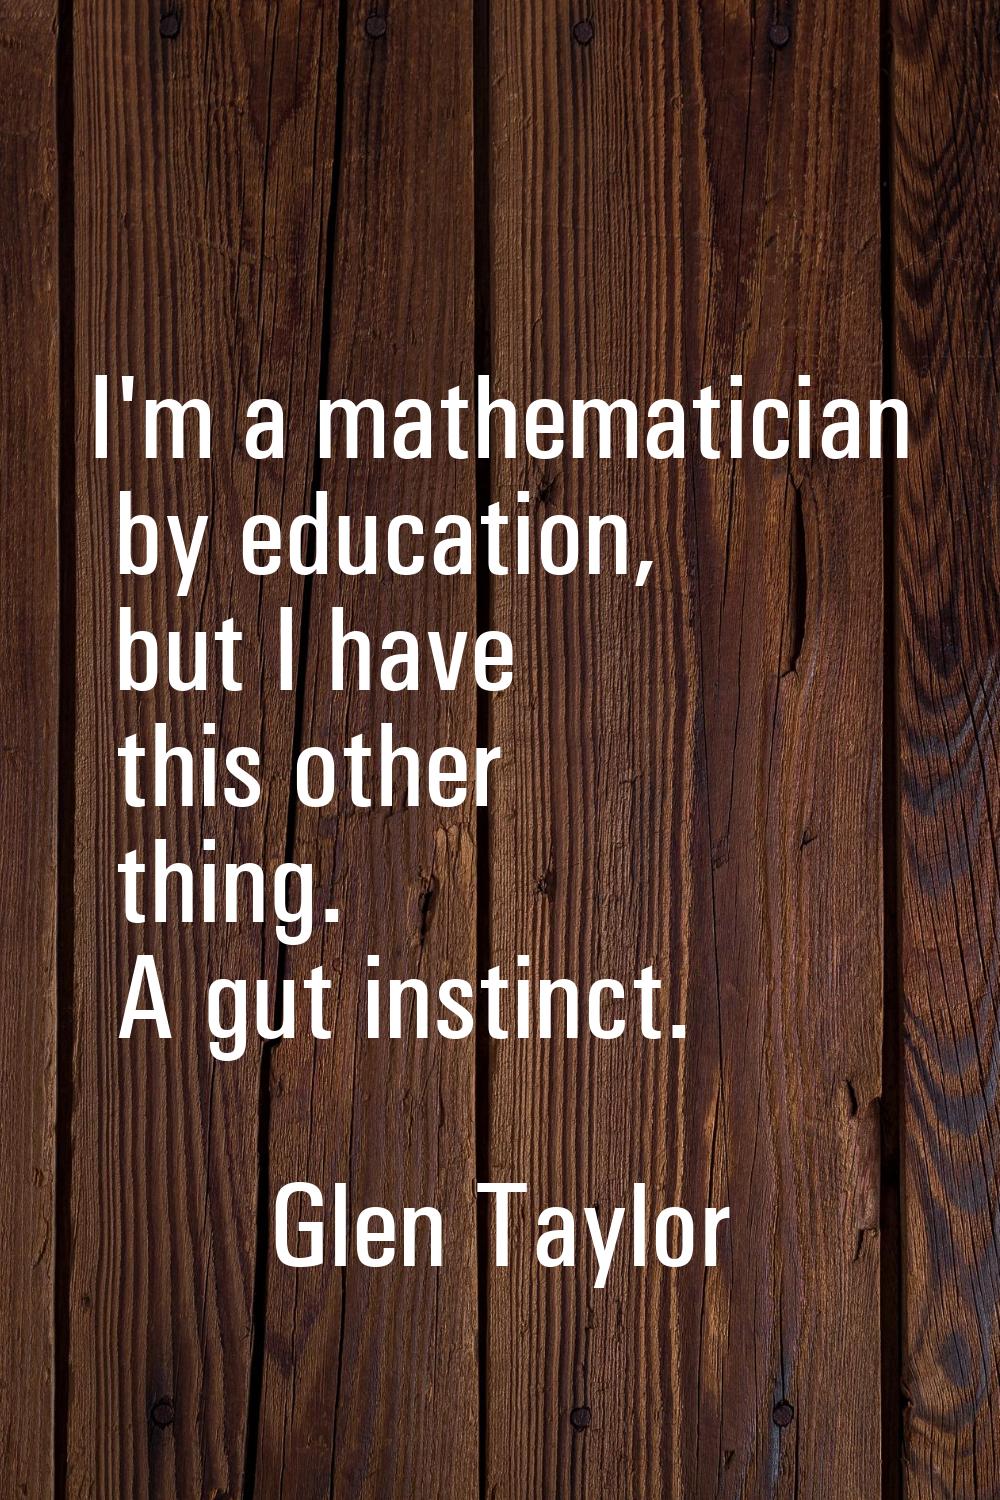 I'm a mathematician by education, but I have this other thing. A gut instinct.